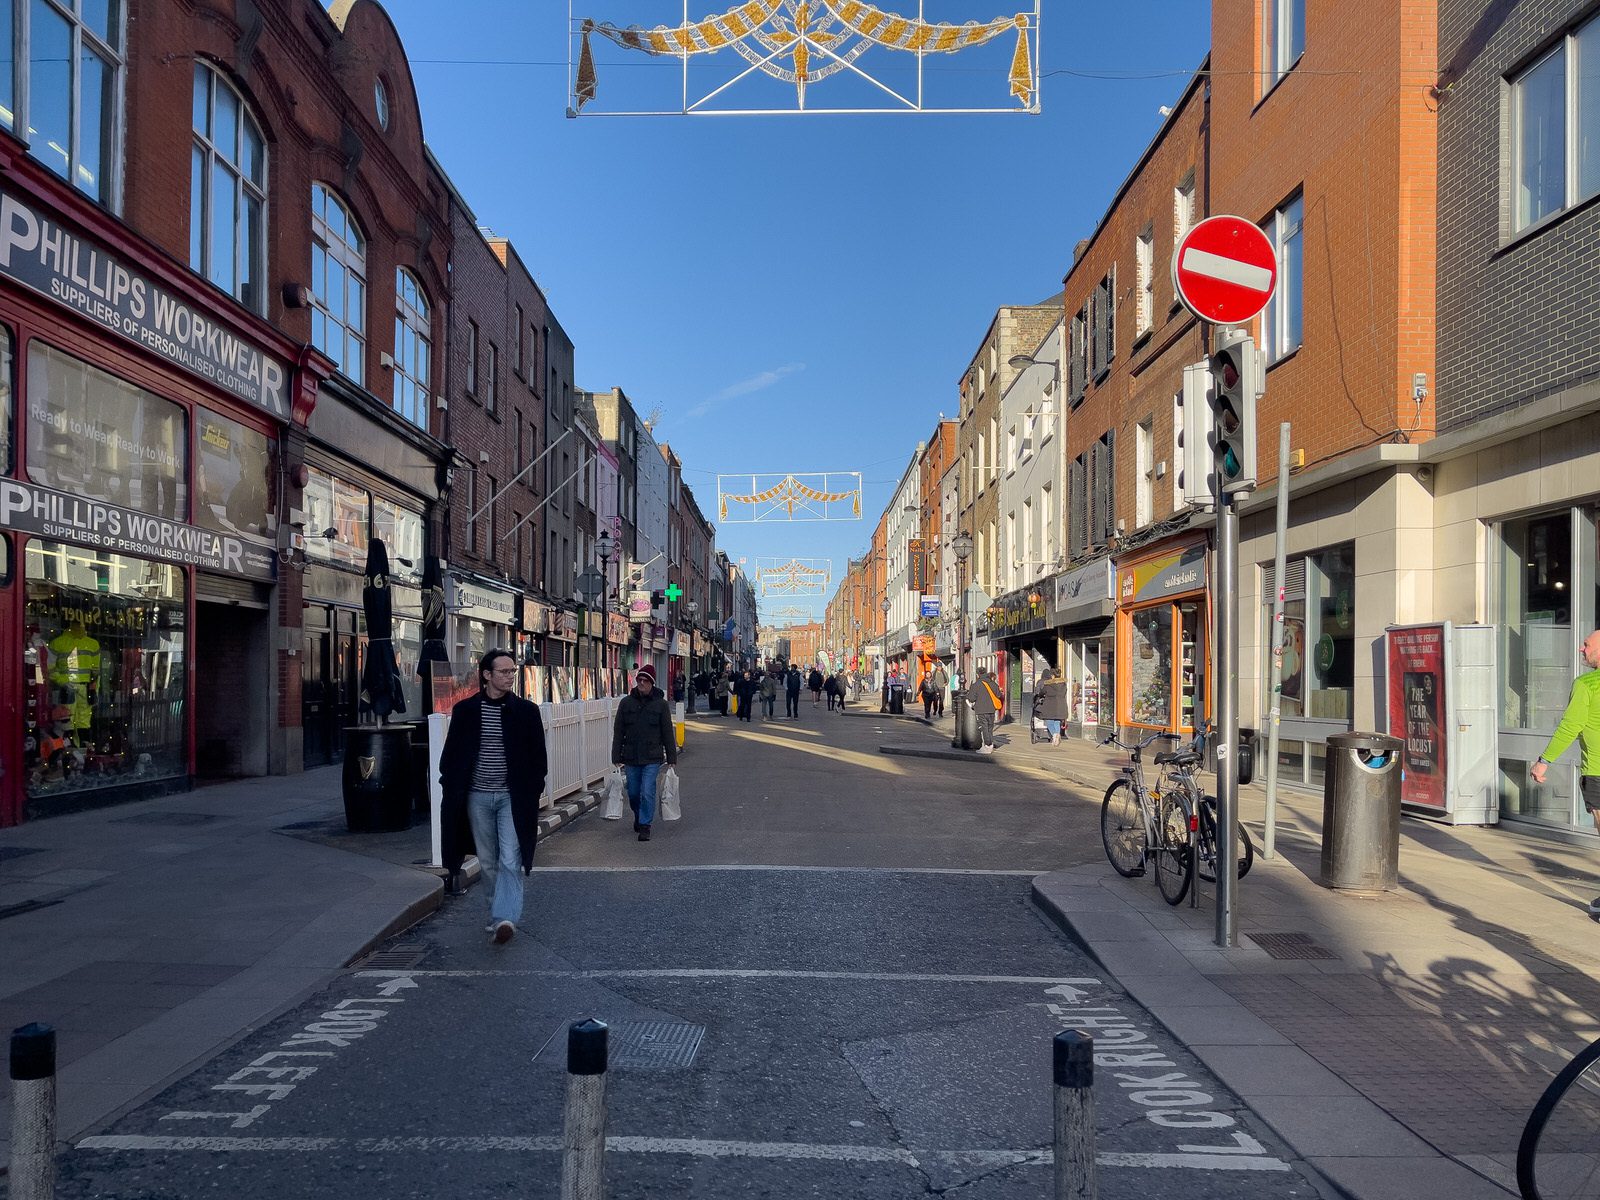 THE NEW STREET FURNITURE AND THE CHRISTMAS TREE [HAVE ARRIVED IN CAPEL STREET]-225869-1